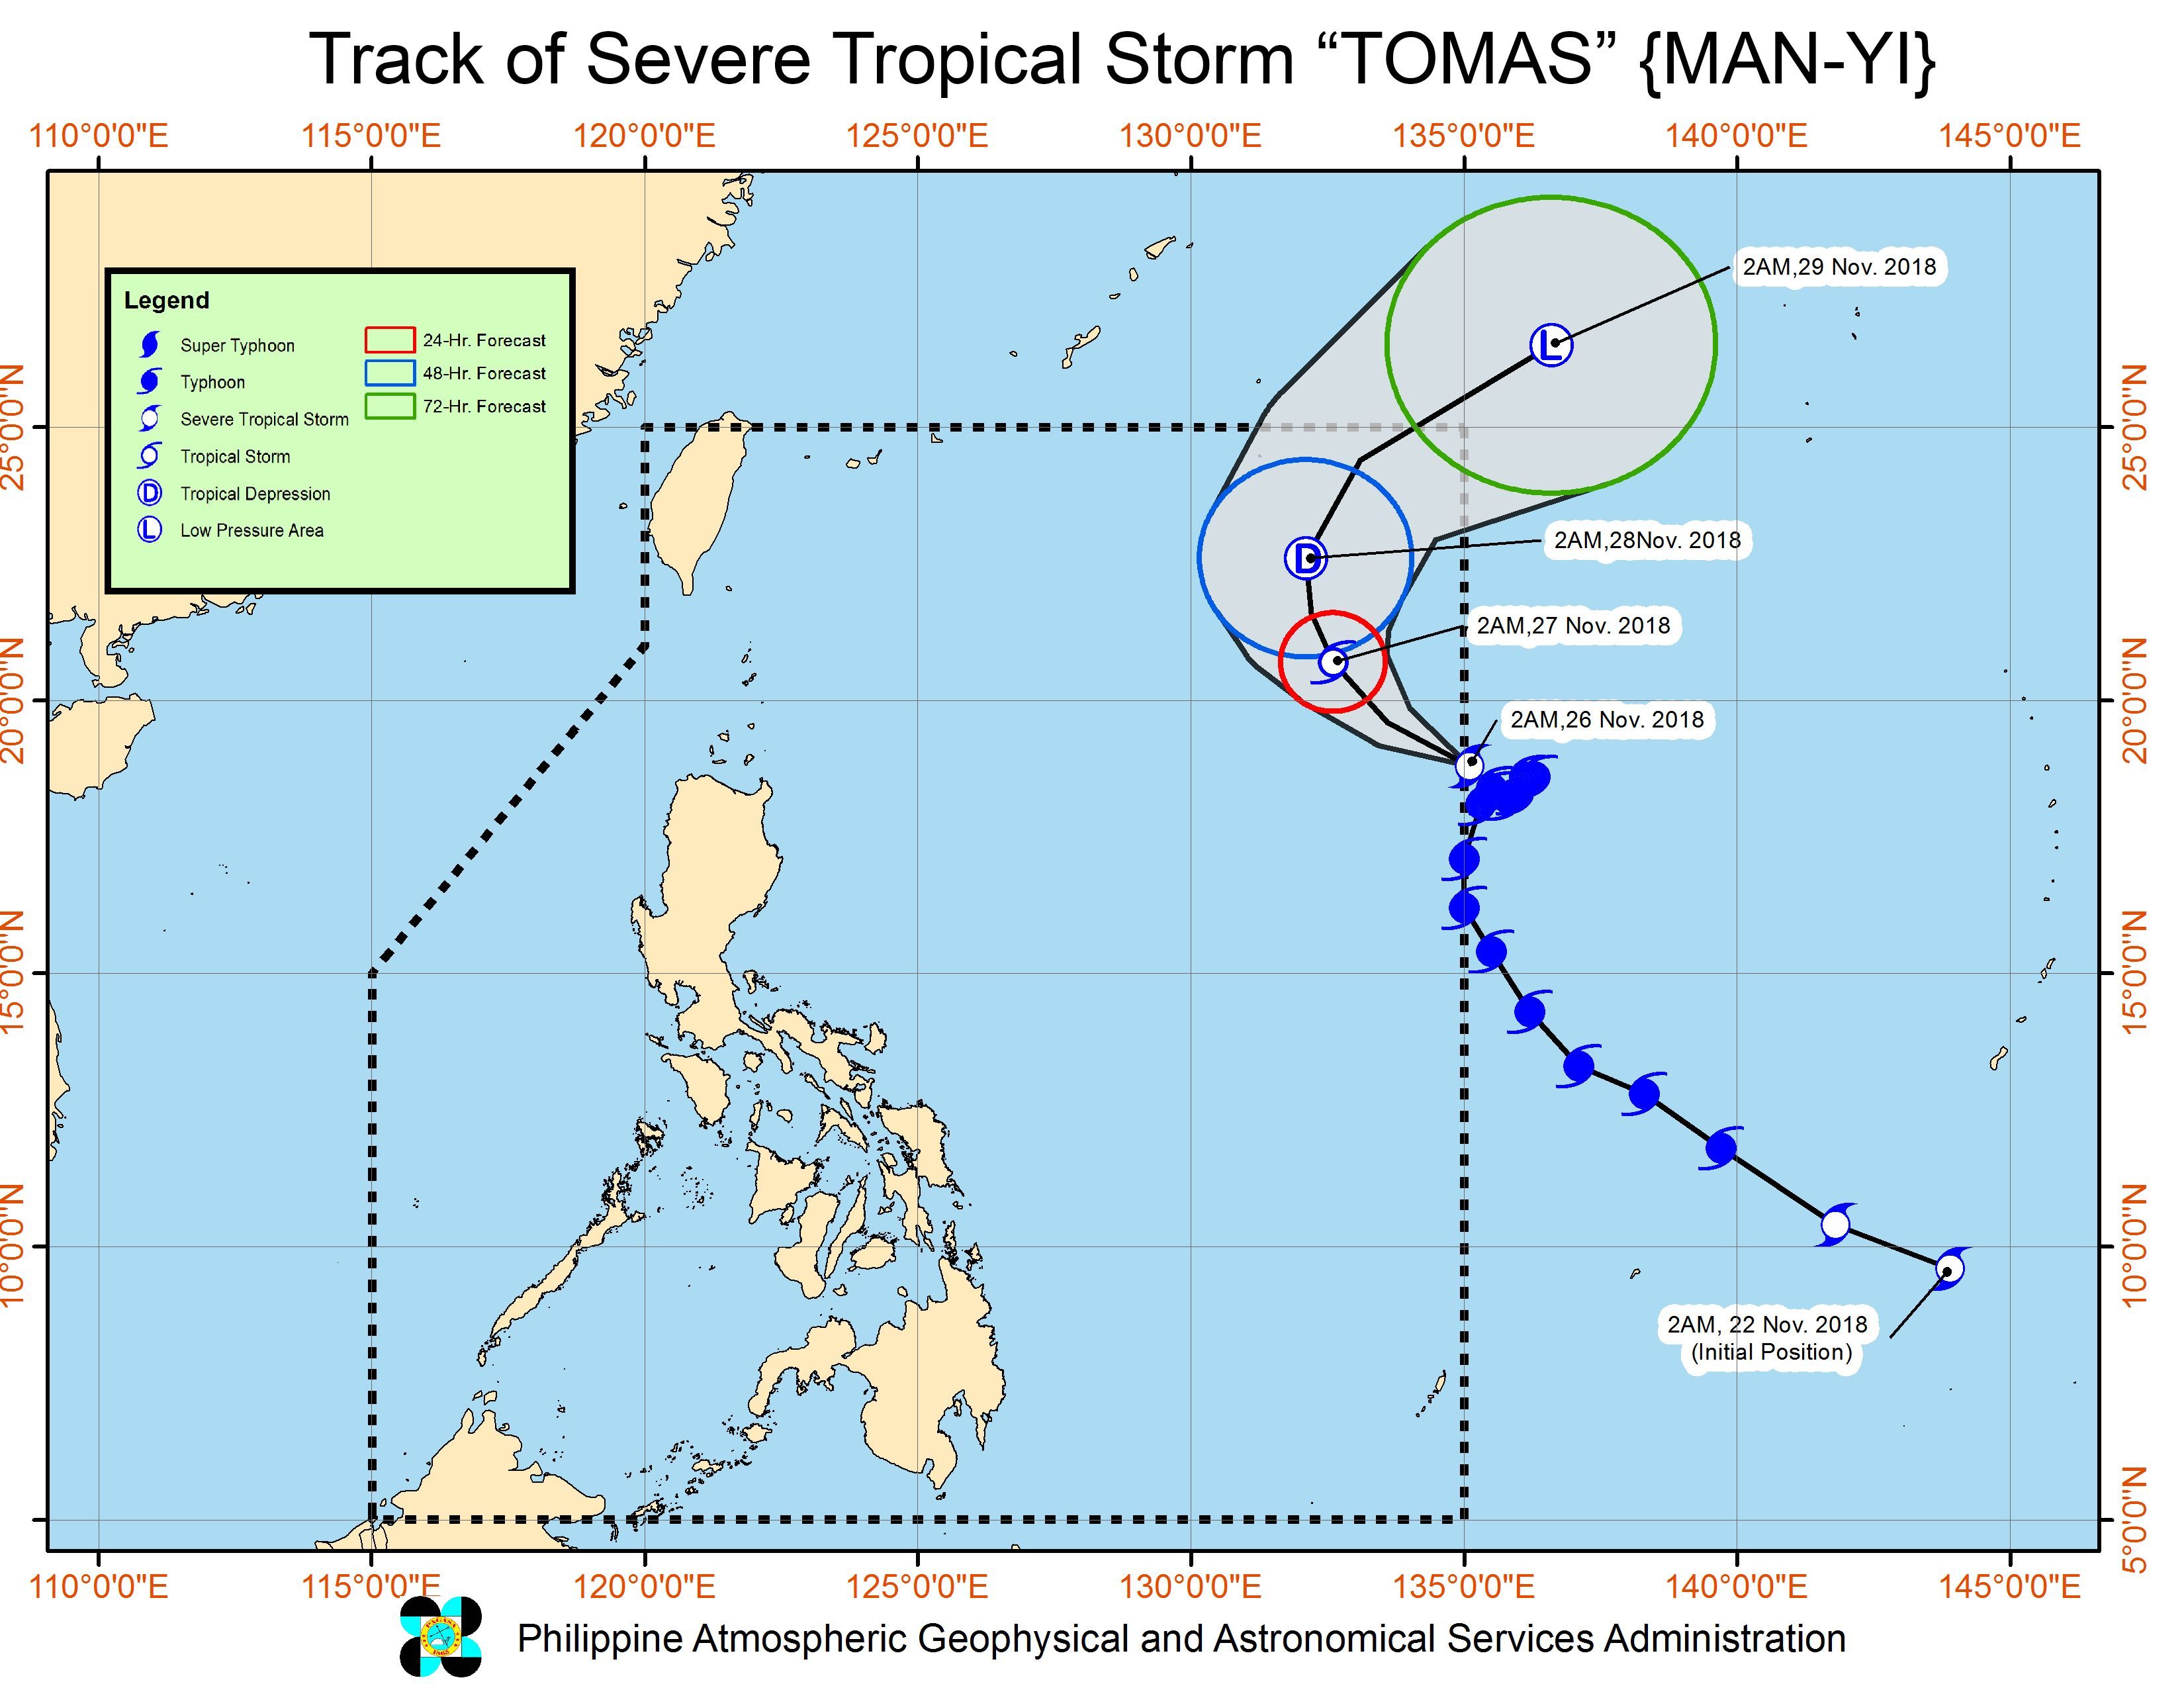 Forecast track of Severe Tropical Storm Tomas (Man-yi) as of November 26, 2018, 4 am. Image from PAGASA 